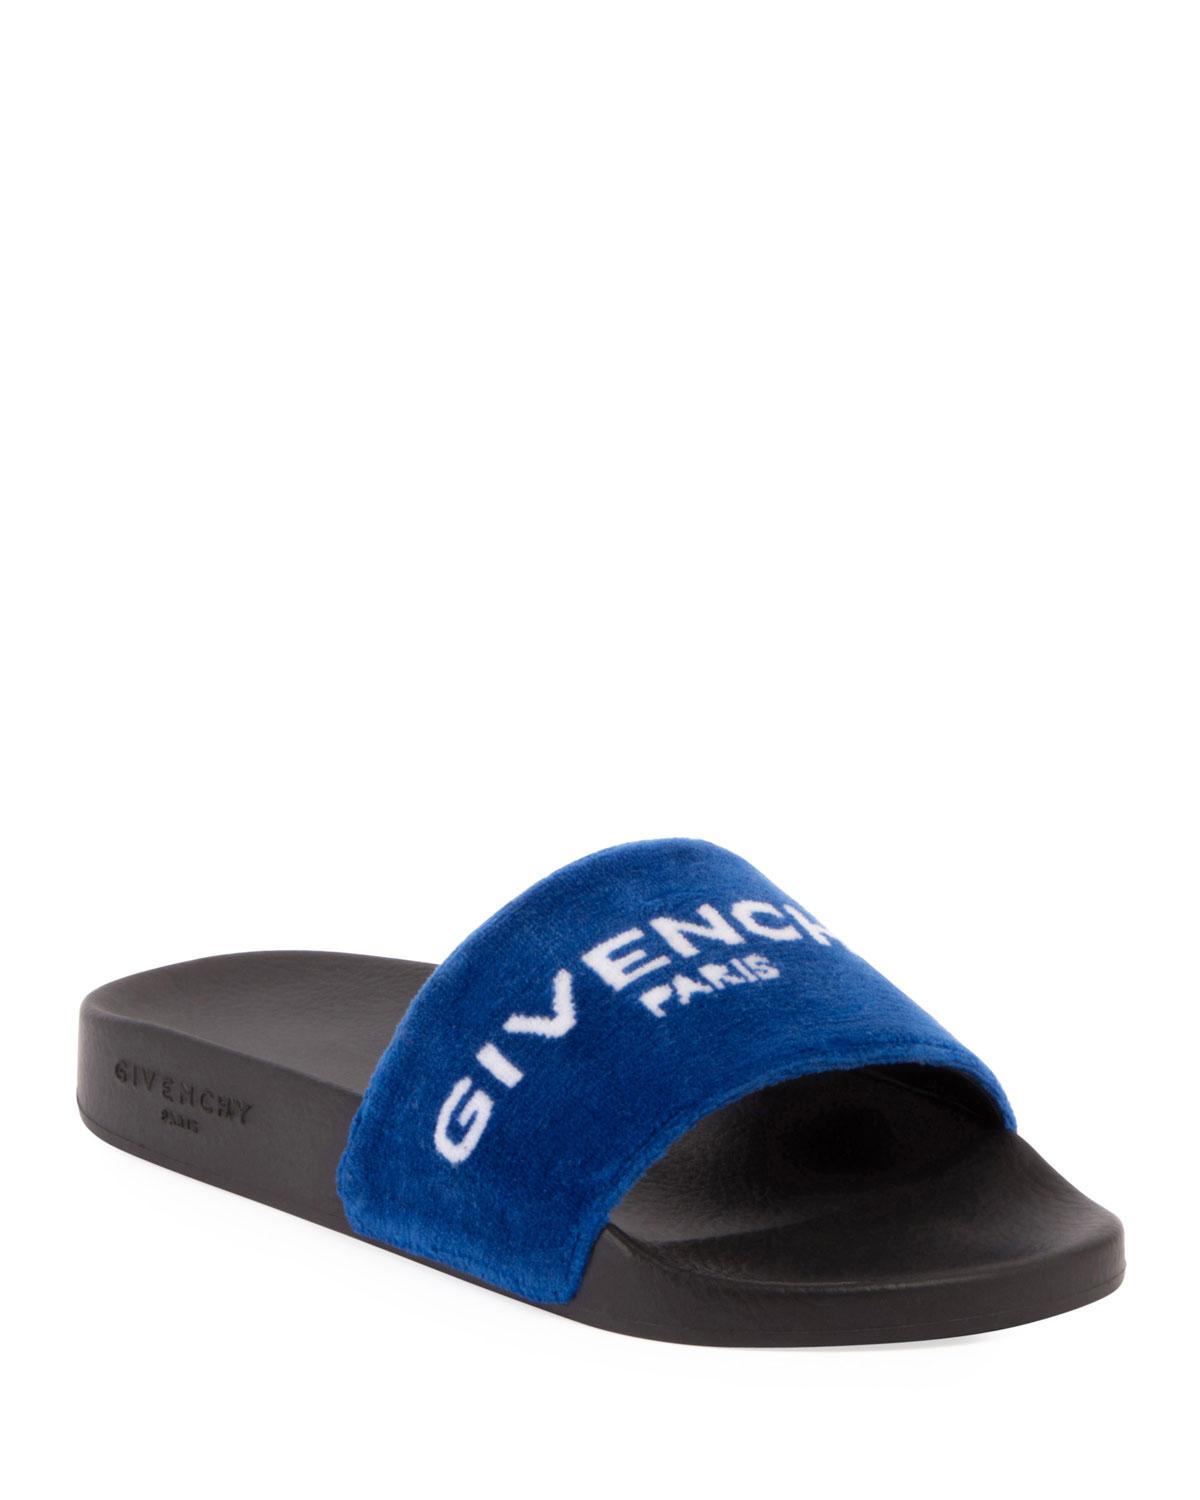 Givenchy Cotton Terry Cloth  Logo Slide  Sandal  in Blue for 